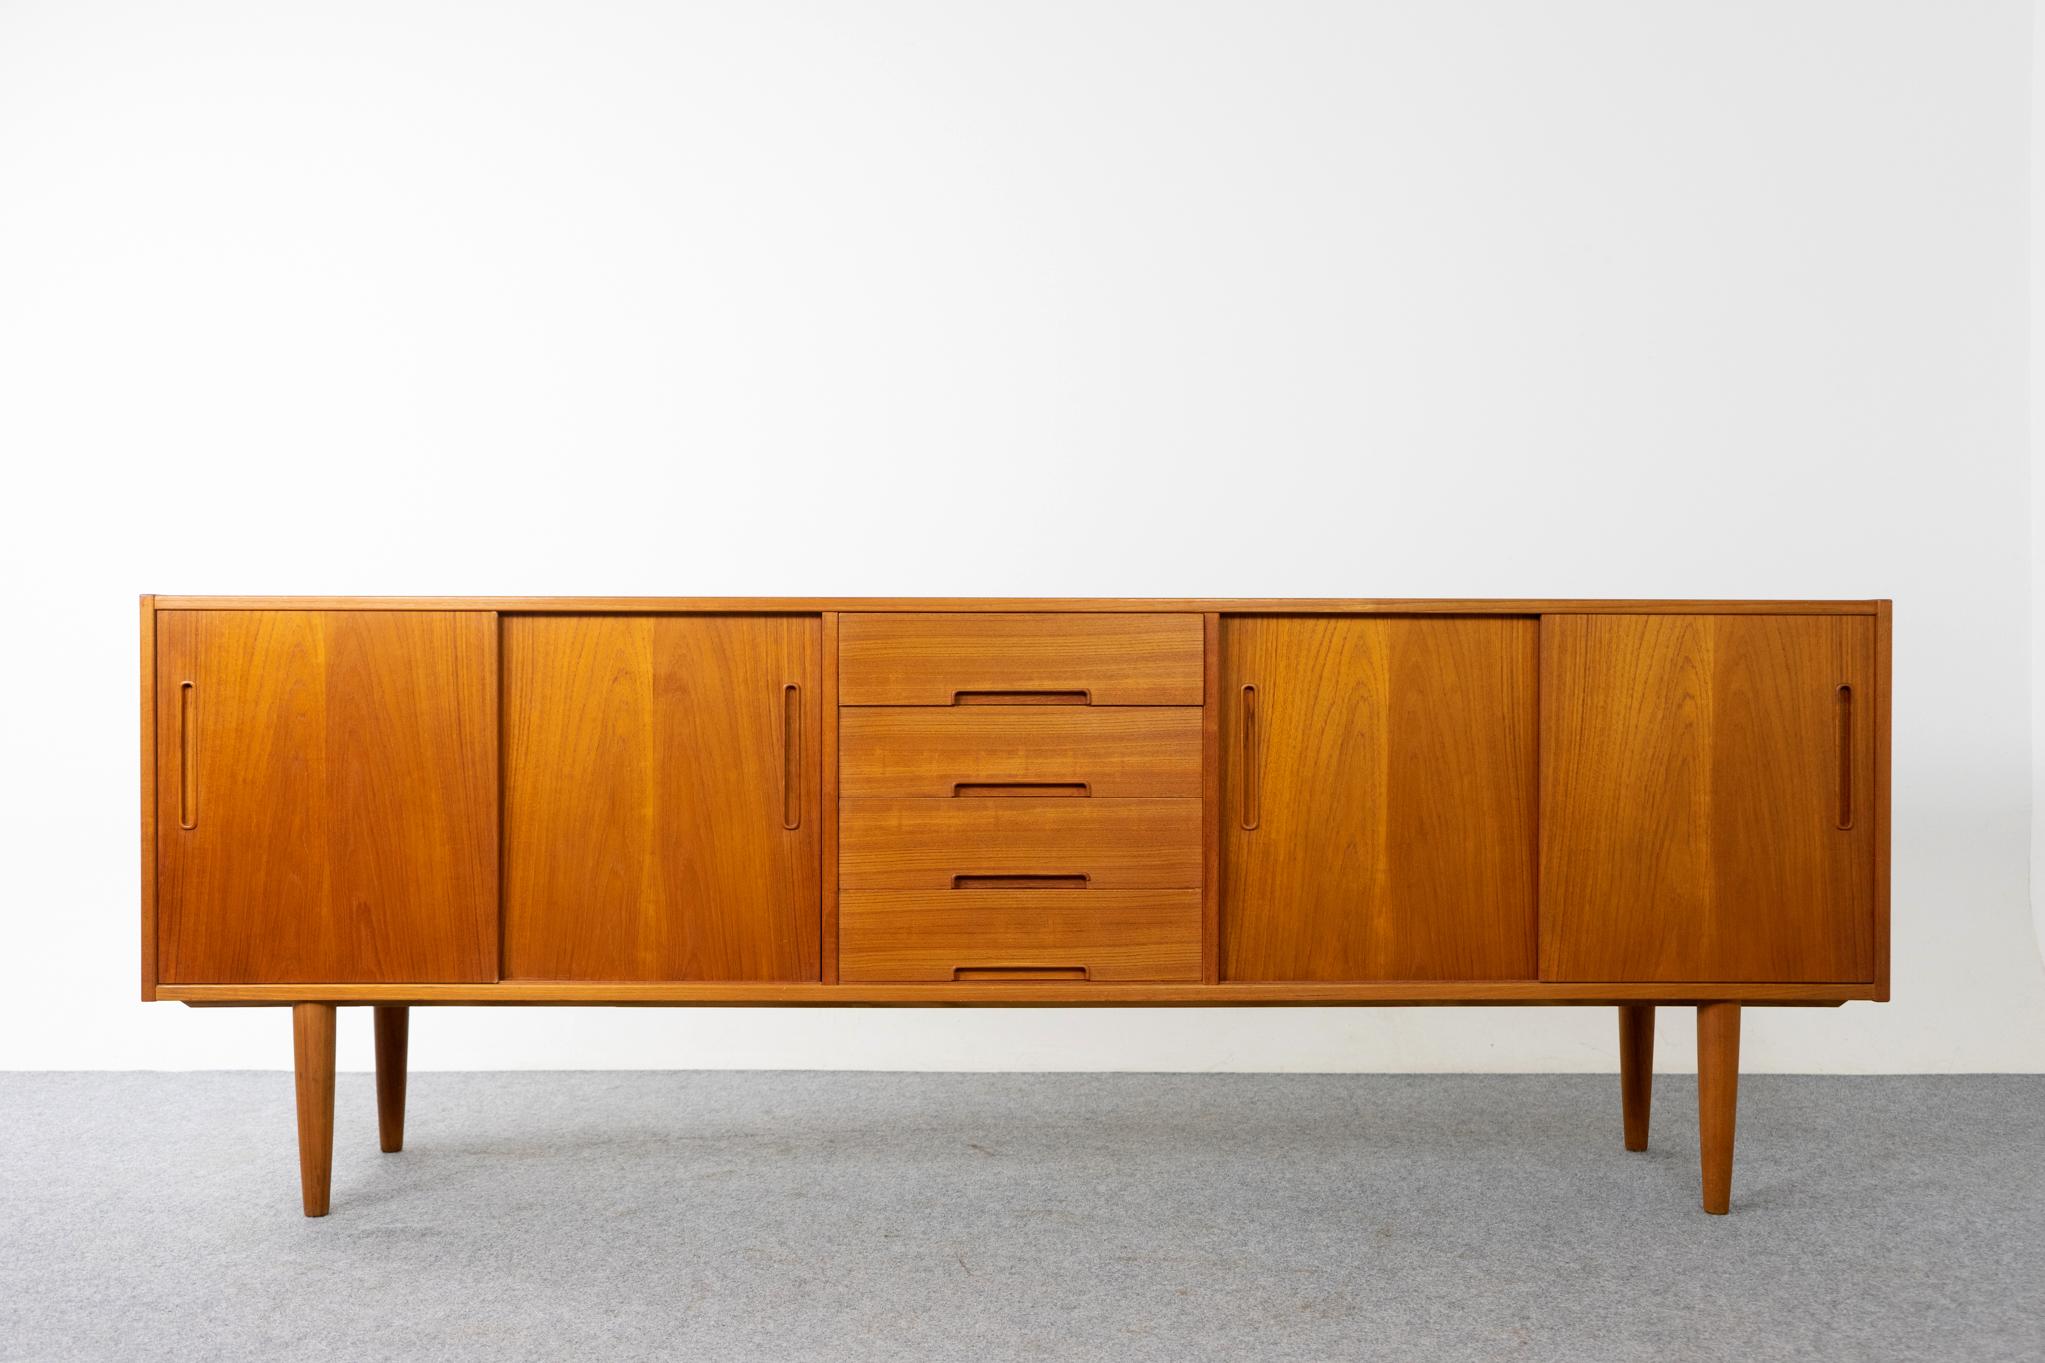 Teak Scandinavian gigant sideboard by Nils Jonsson manufactured by Troeds Bjarnum, circa 1960's. Clean, simple lined design with exceptional book-matched veneer. Smooth sliding doors reveal two adjustable shelves that can be hung at ten different